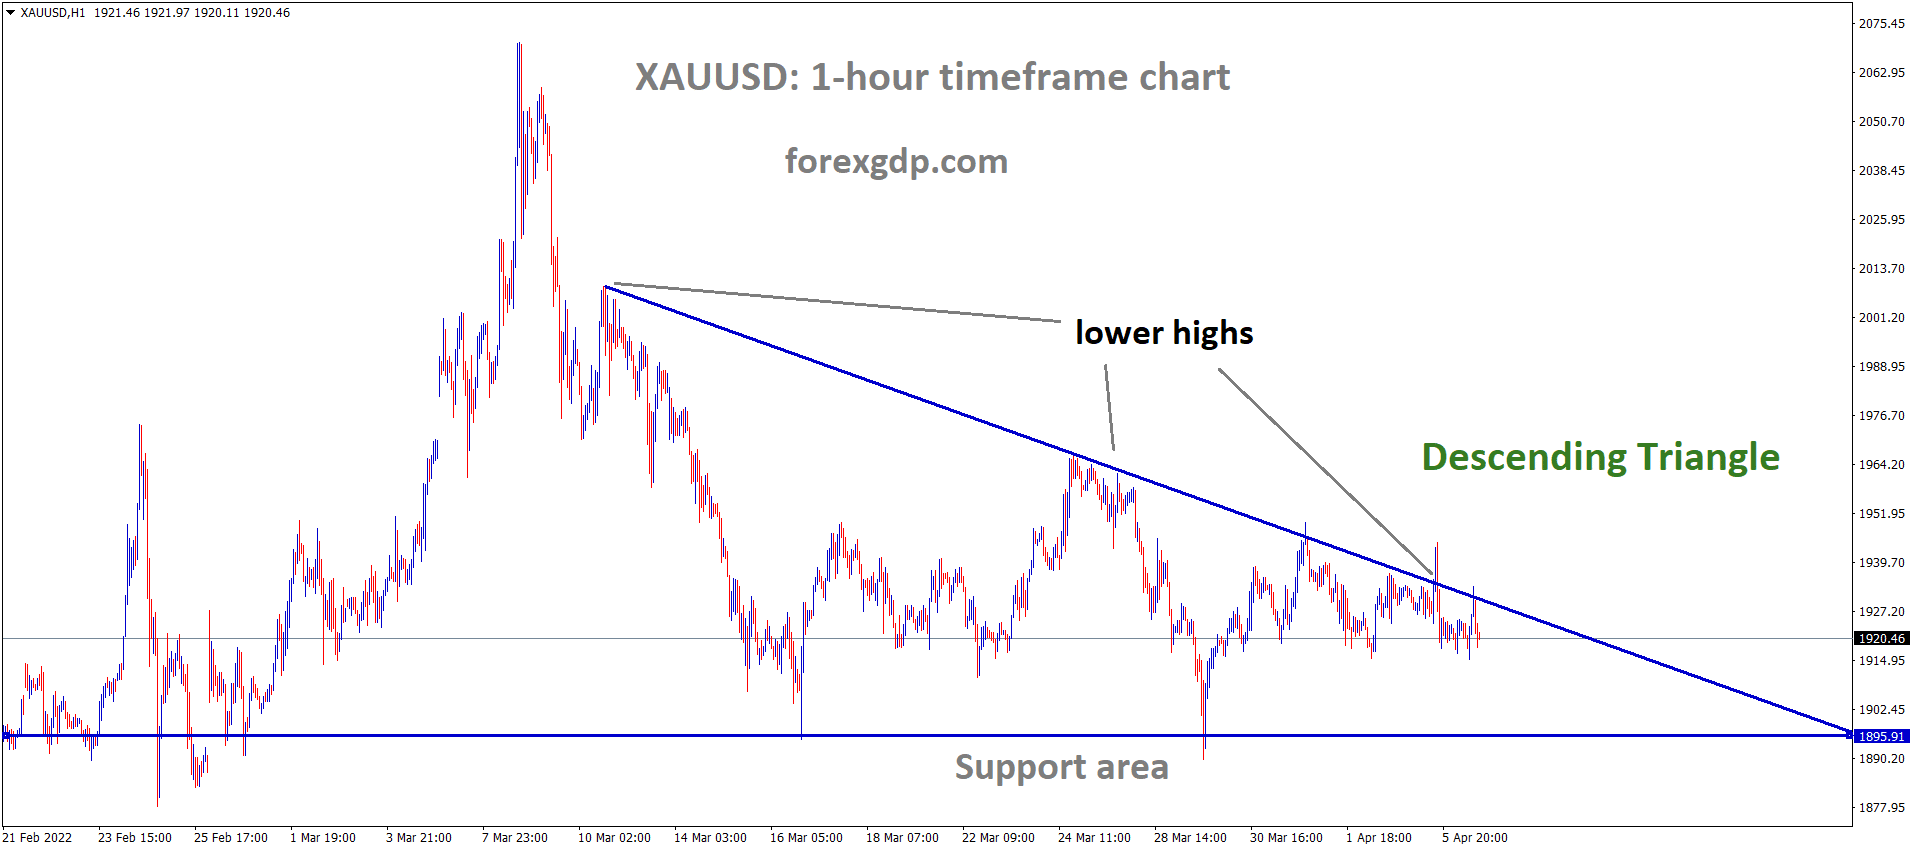 XAUUSD H1 Time Frame market is moving in the Descending triangle pattern